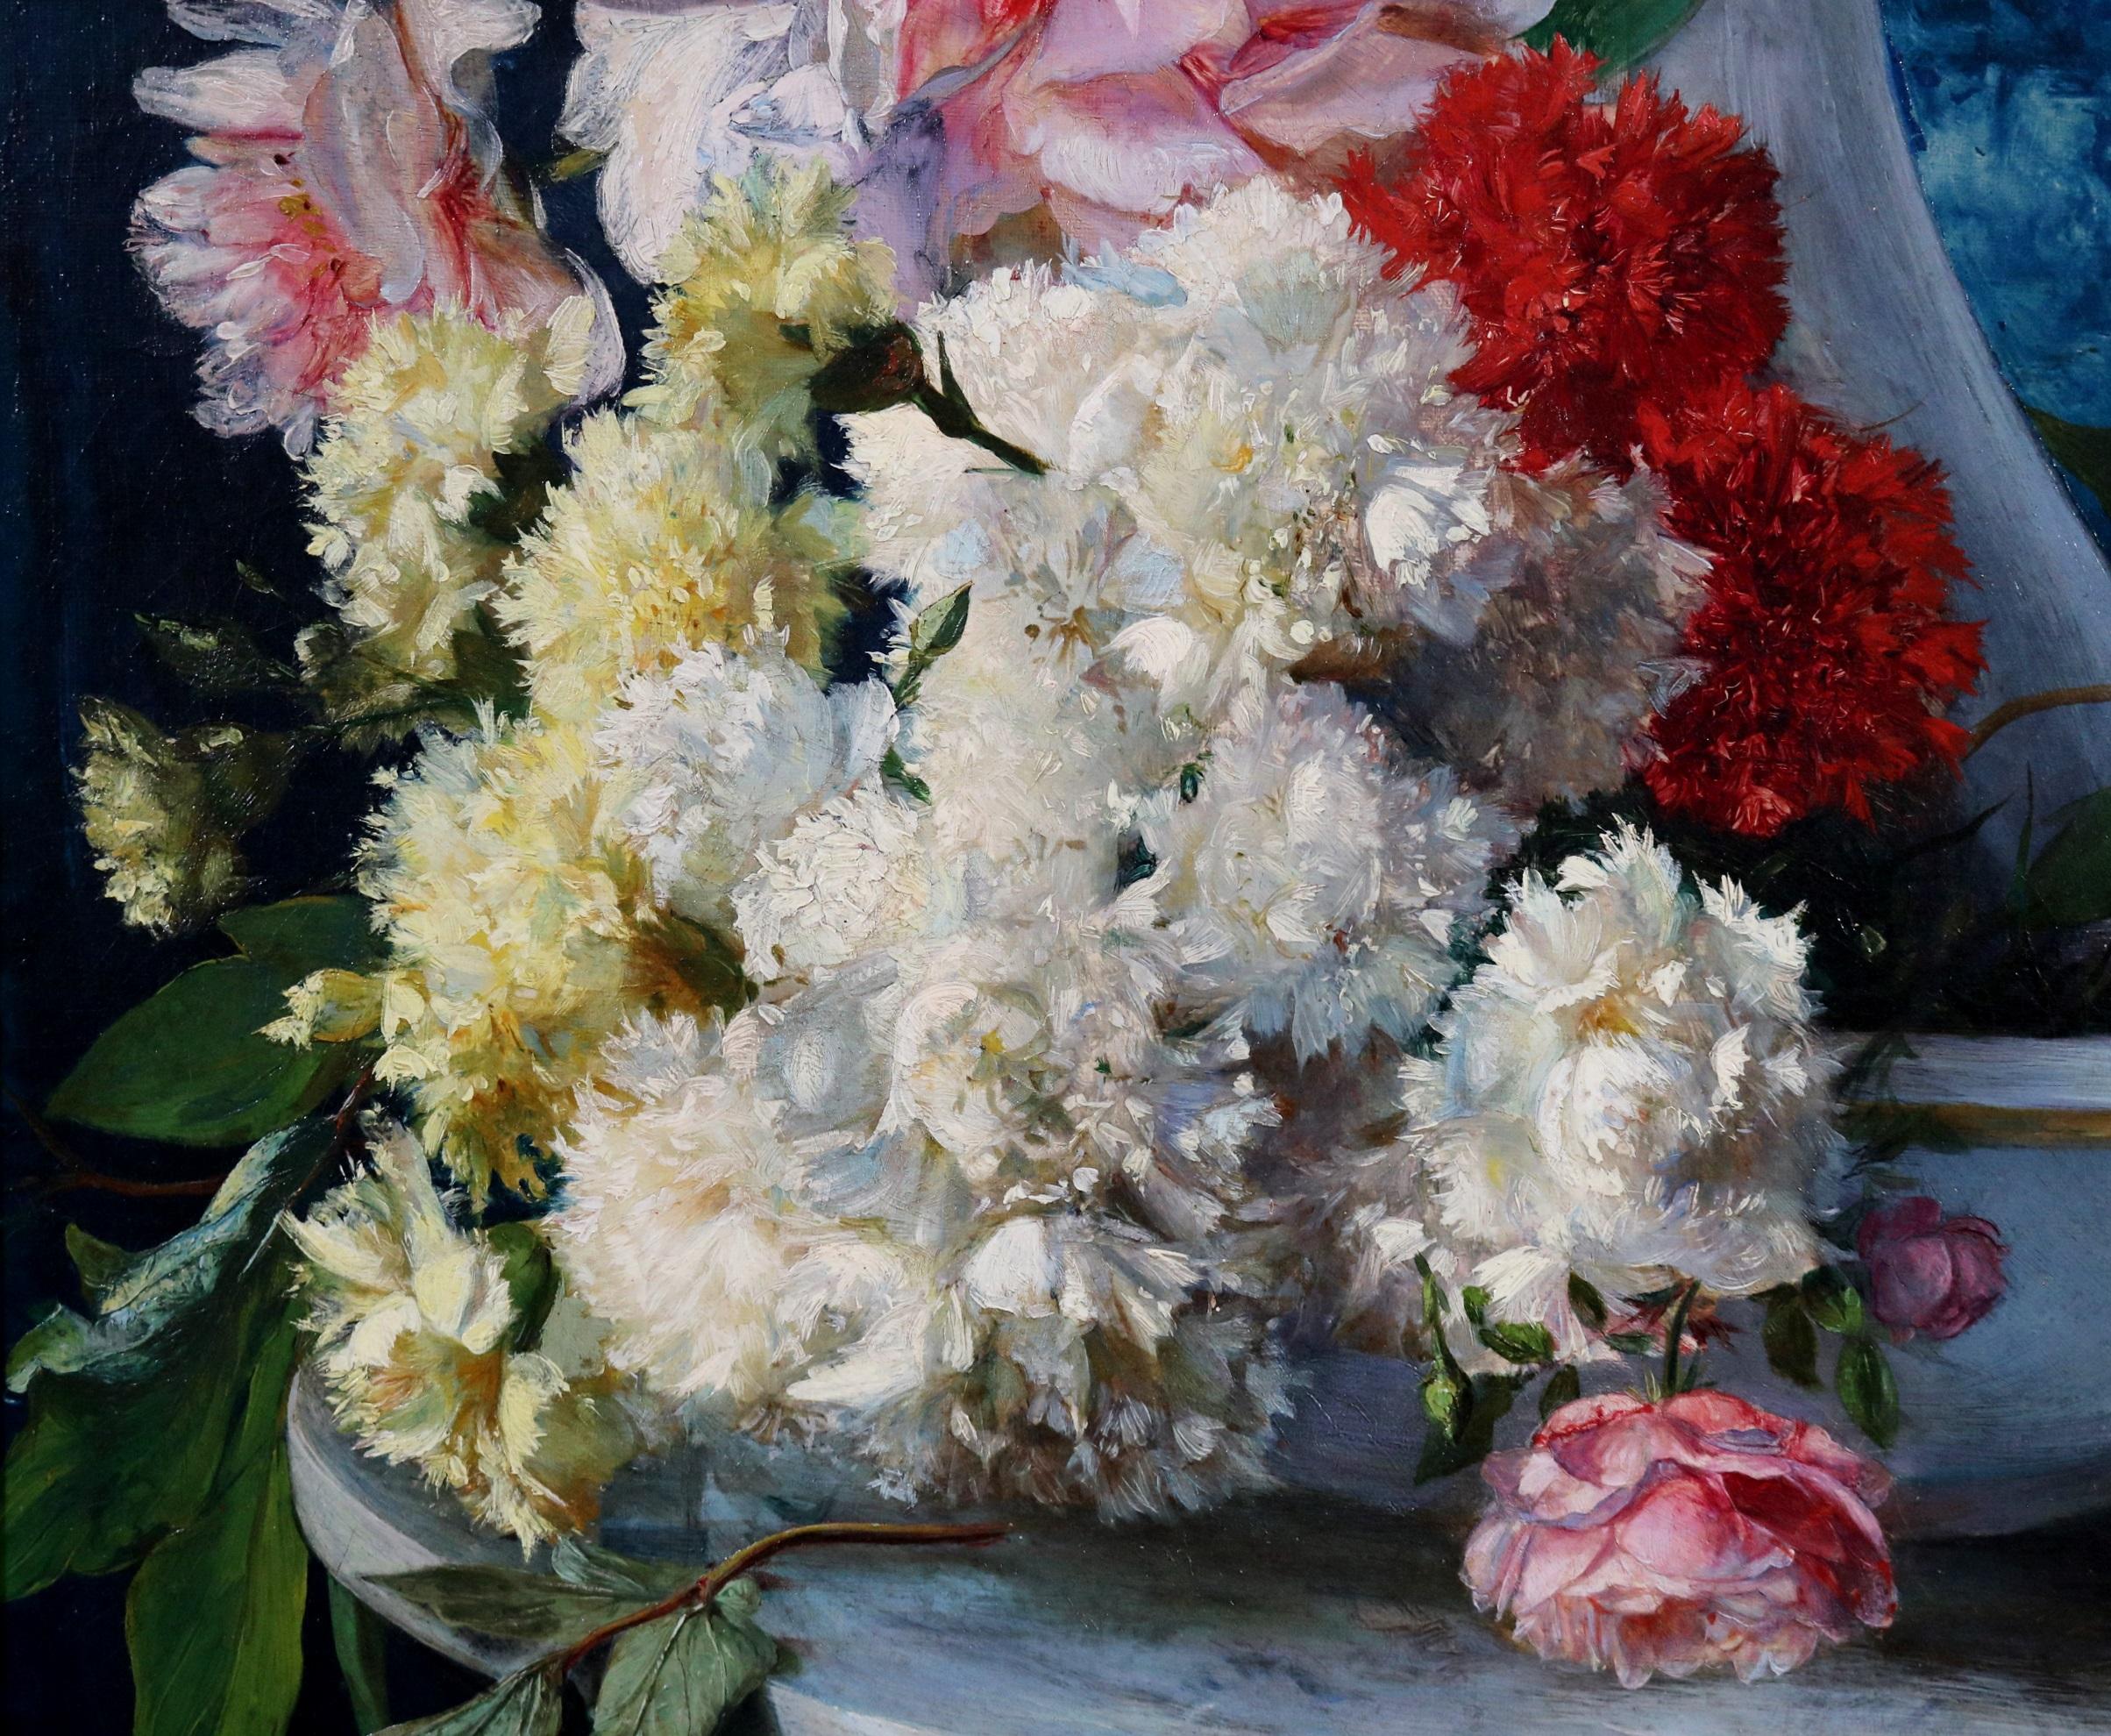 ‘Flores de Verano' by Ricardo Martí Aguiló (1857-1935). The painting – which depicts a summer floral bouquet in an opalescent glass jug on a marble column – is signed by the artist and hangs in a fine quality gold metal leaf frame. 

Academy Fine